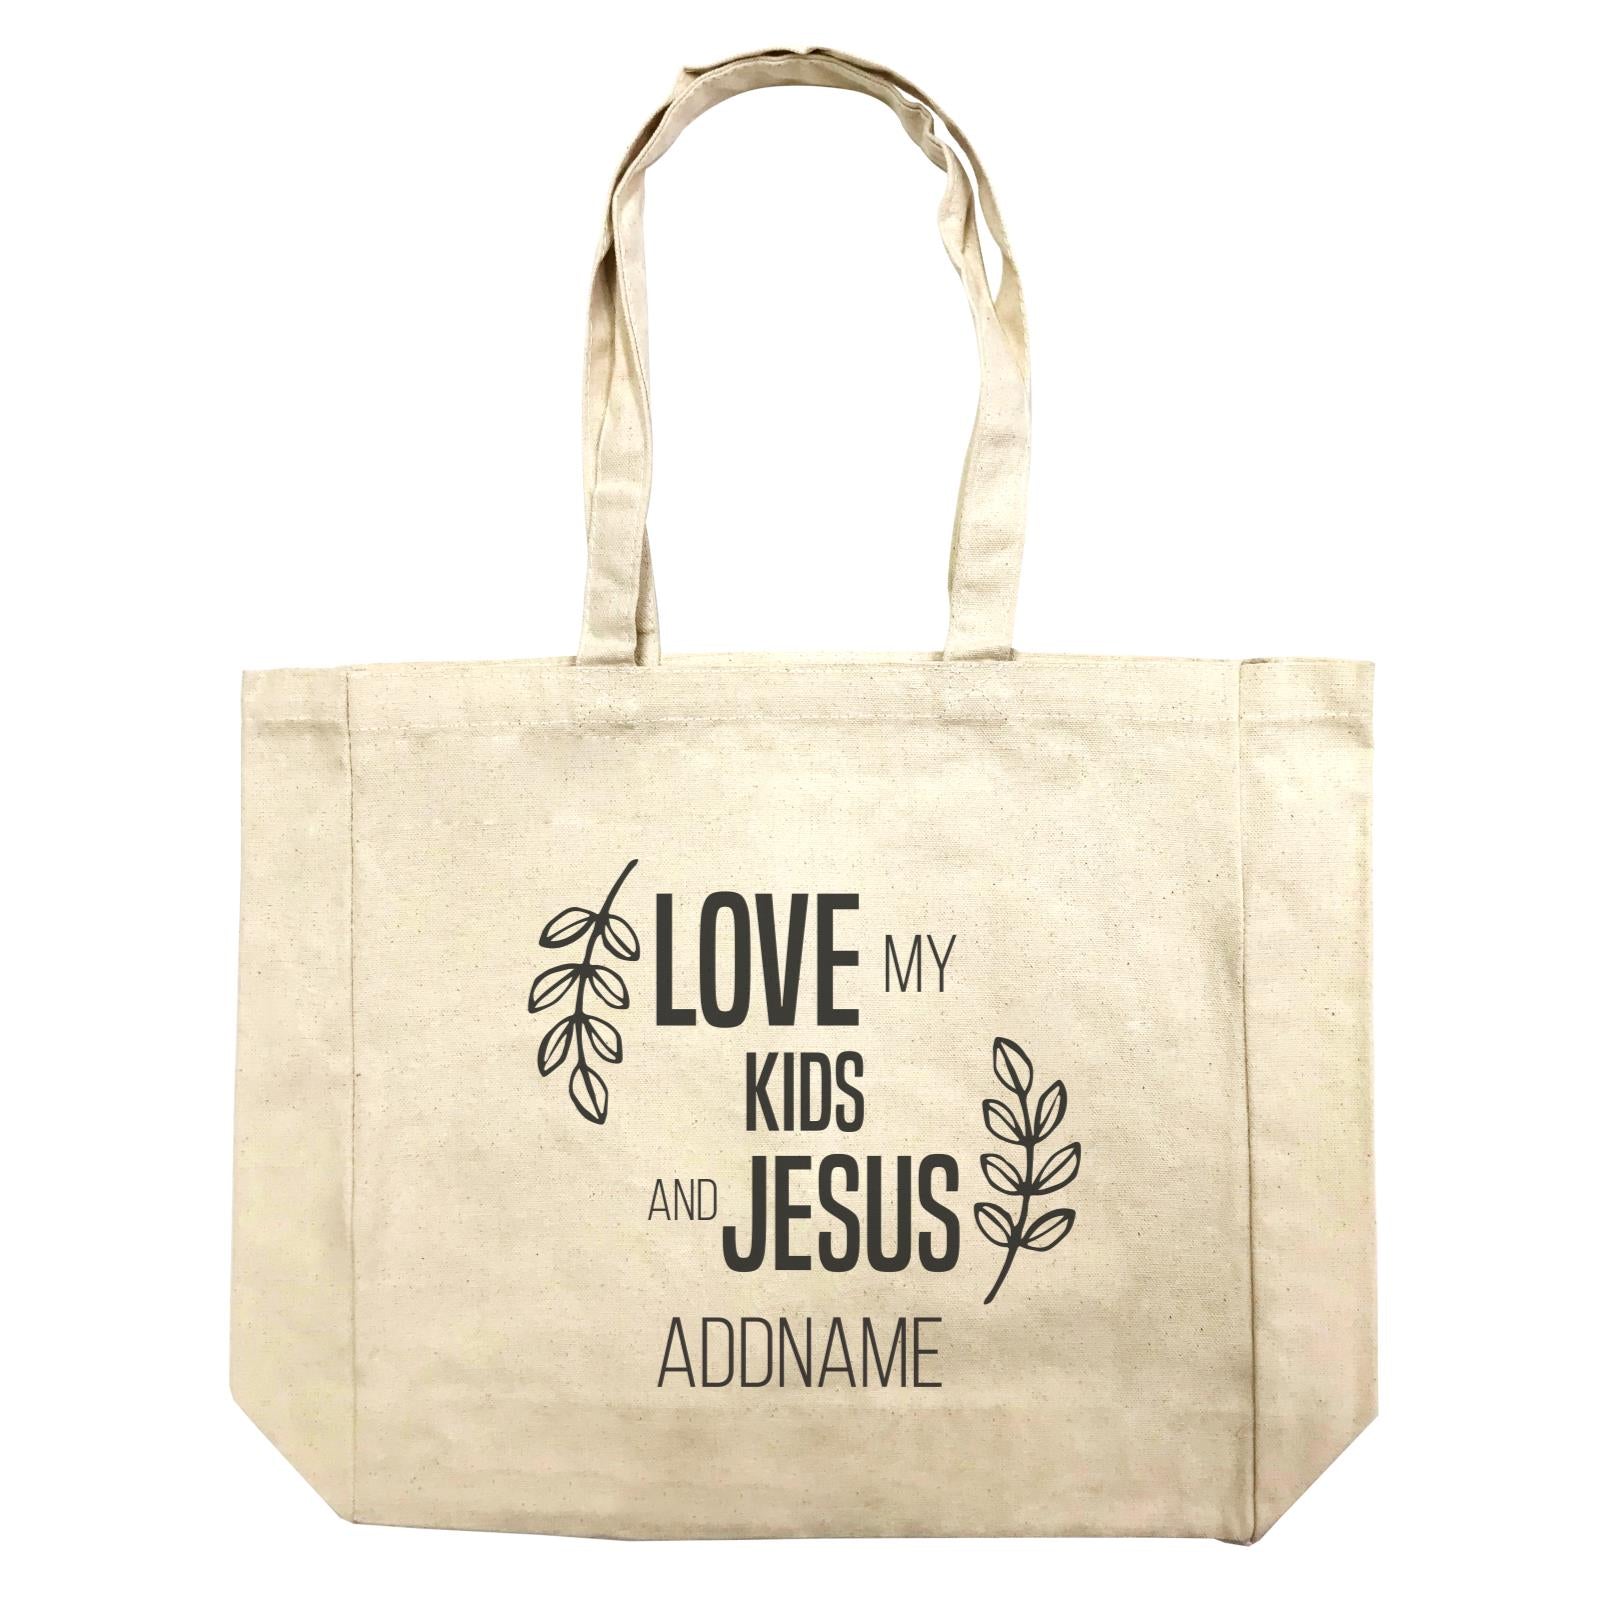 Christian Series Love My Kids And Jesus Addname Shopping Bag